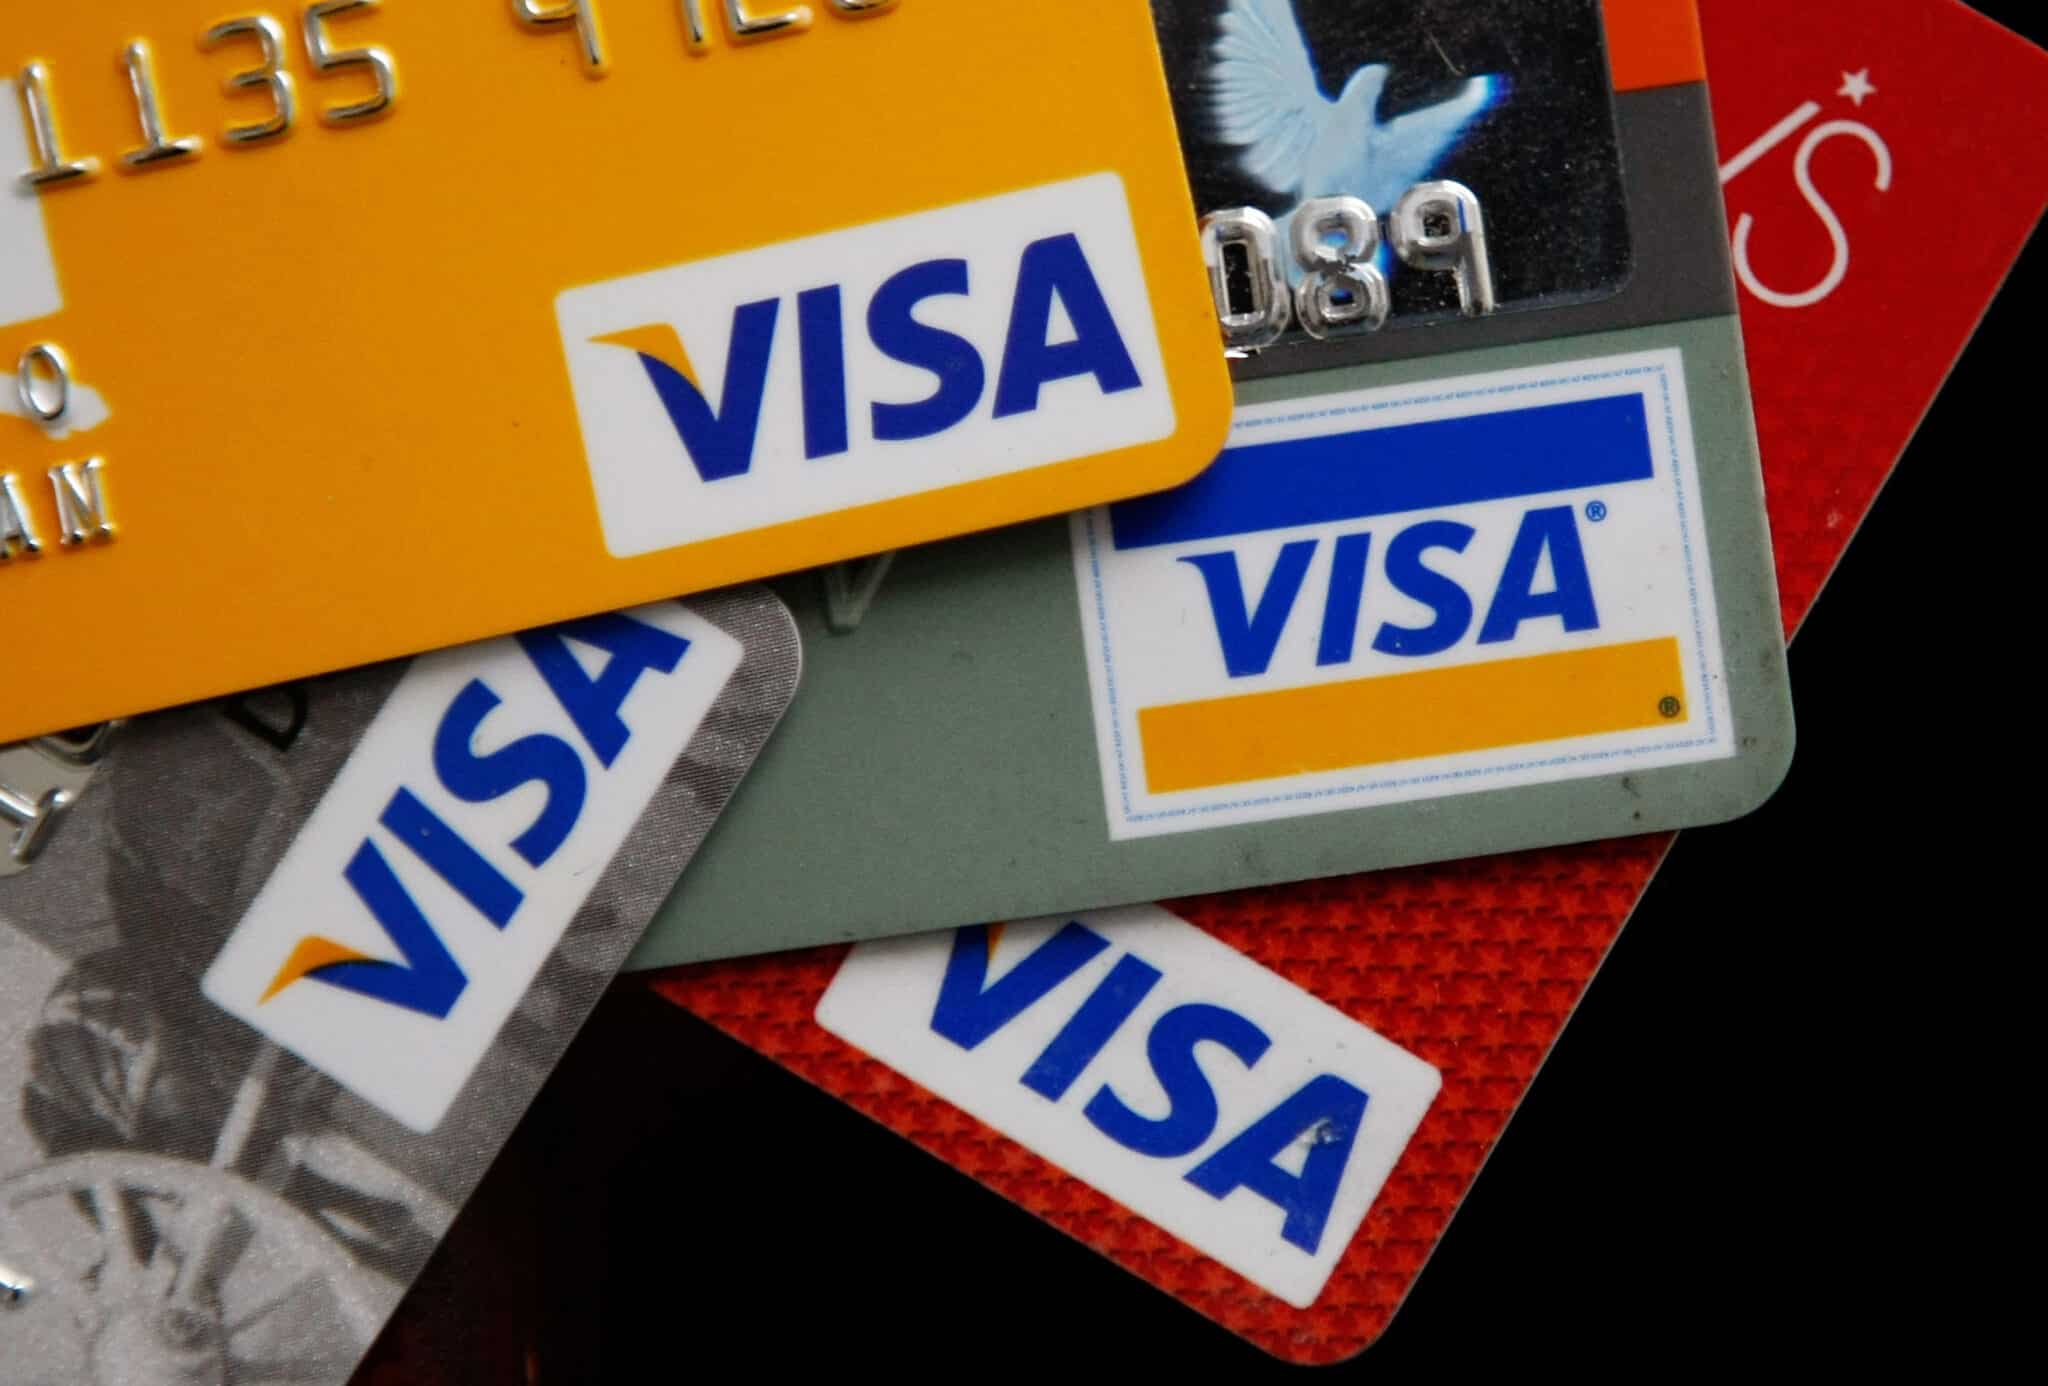 SAN FRANCISCO - FEBRUARY 25:  Visa credit cards are arranged on a desk February 25, 2008 in San Francisco, California. Visa Inc. is hoping that its initial public offering could raise up to $19 billion and becoming  the largest IPO in U.S. history.  (Photo Illustration by Justin Sullivan/Getty Images)